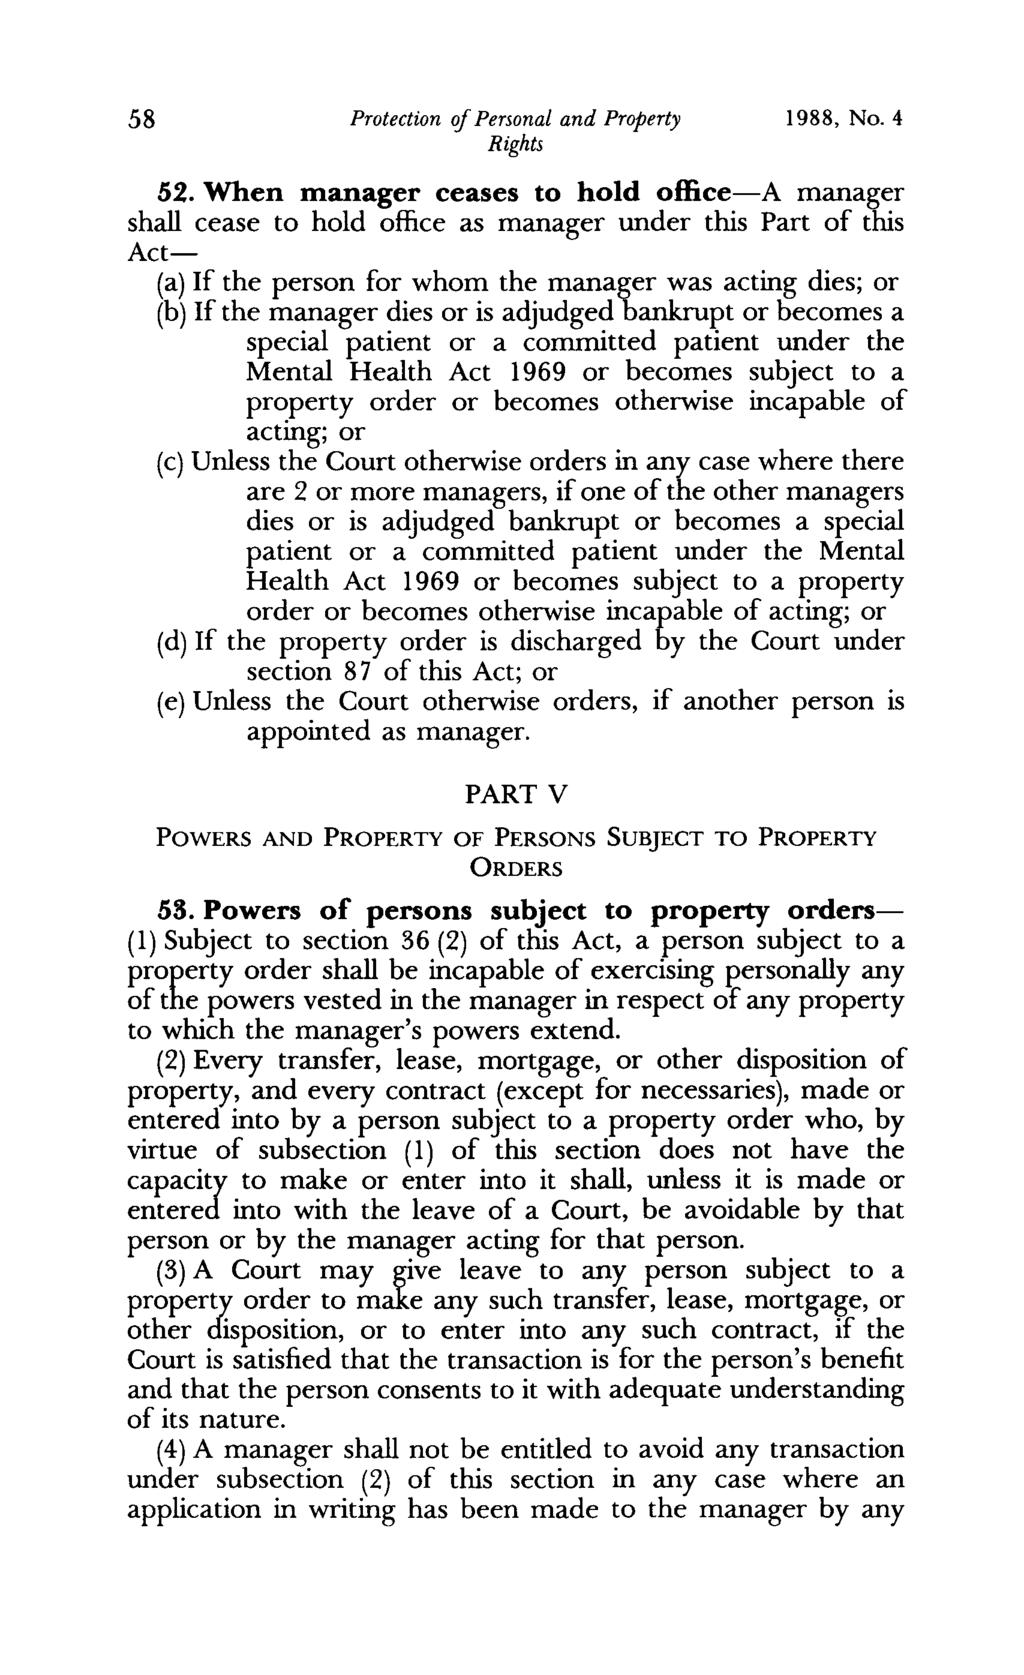 58 Protection 0/ Personal and Property 1988, No. 4 52.